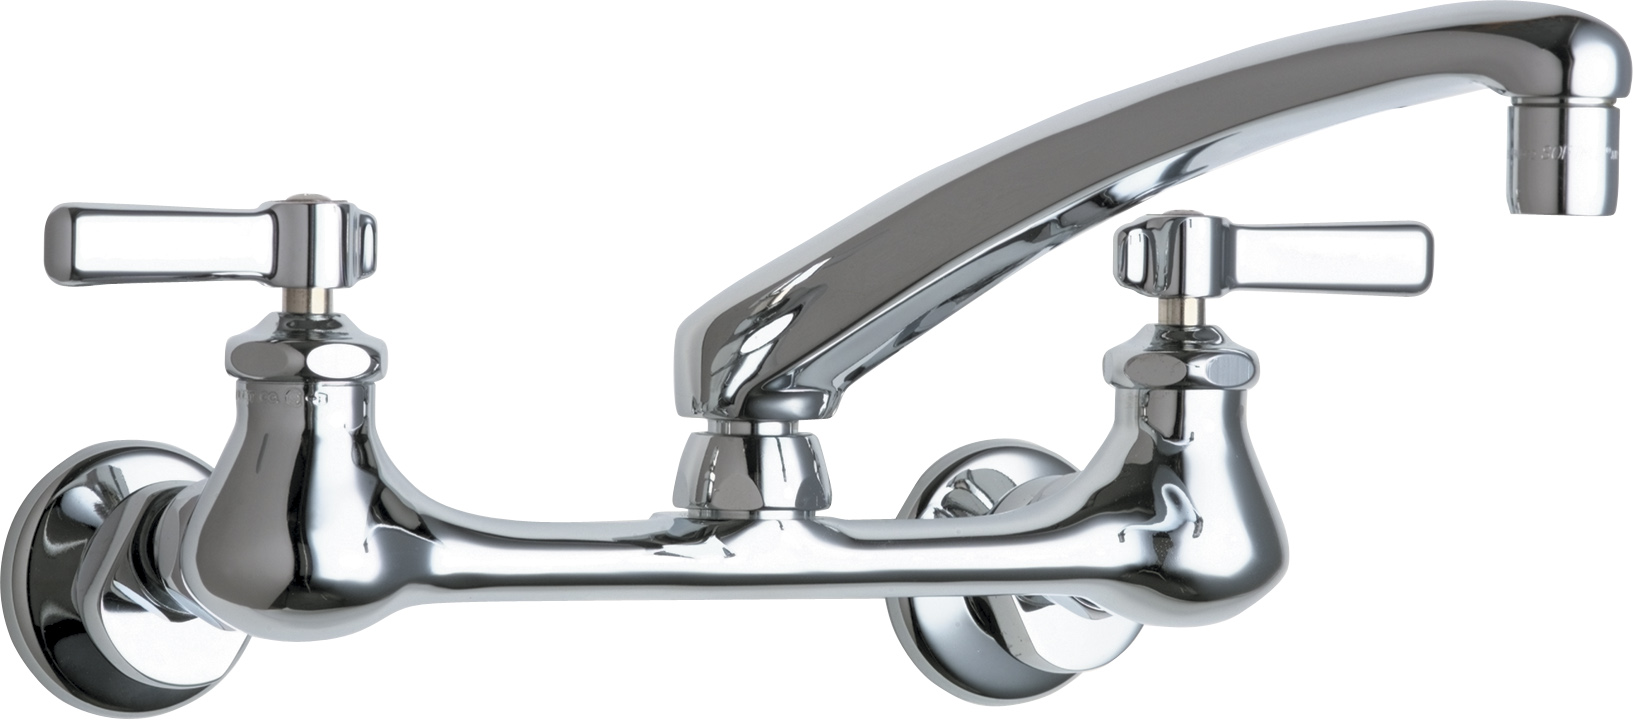 Wall Mounted Manual Sink Faucet With Adjustable Centers Chicago